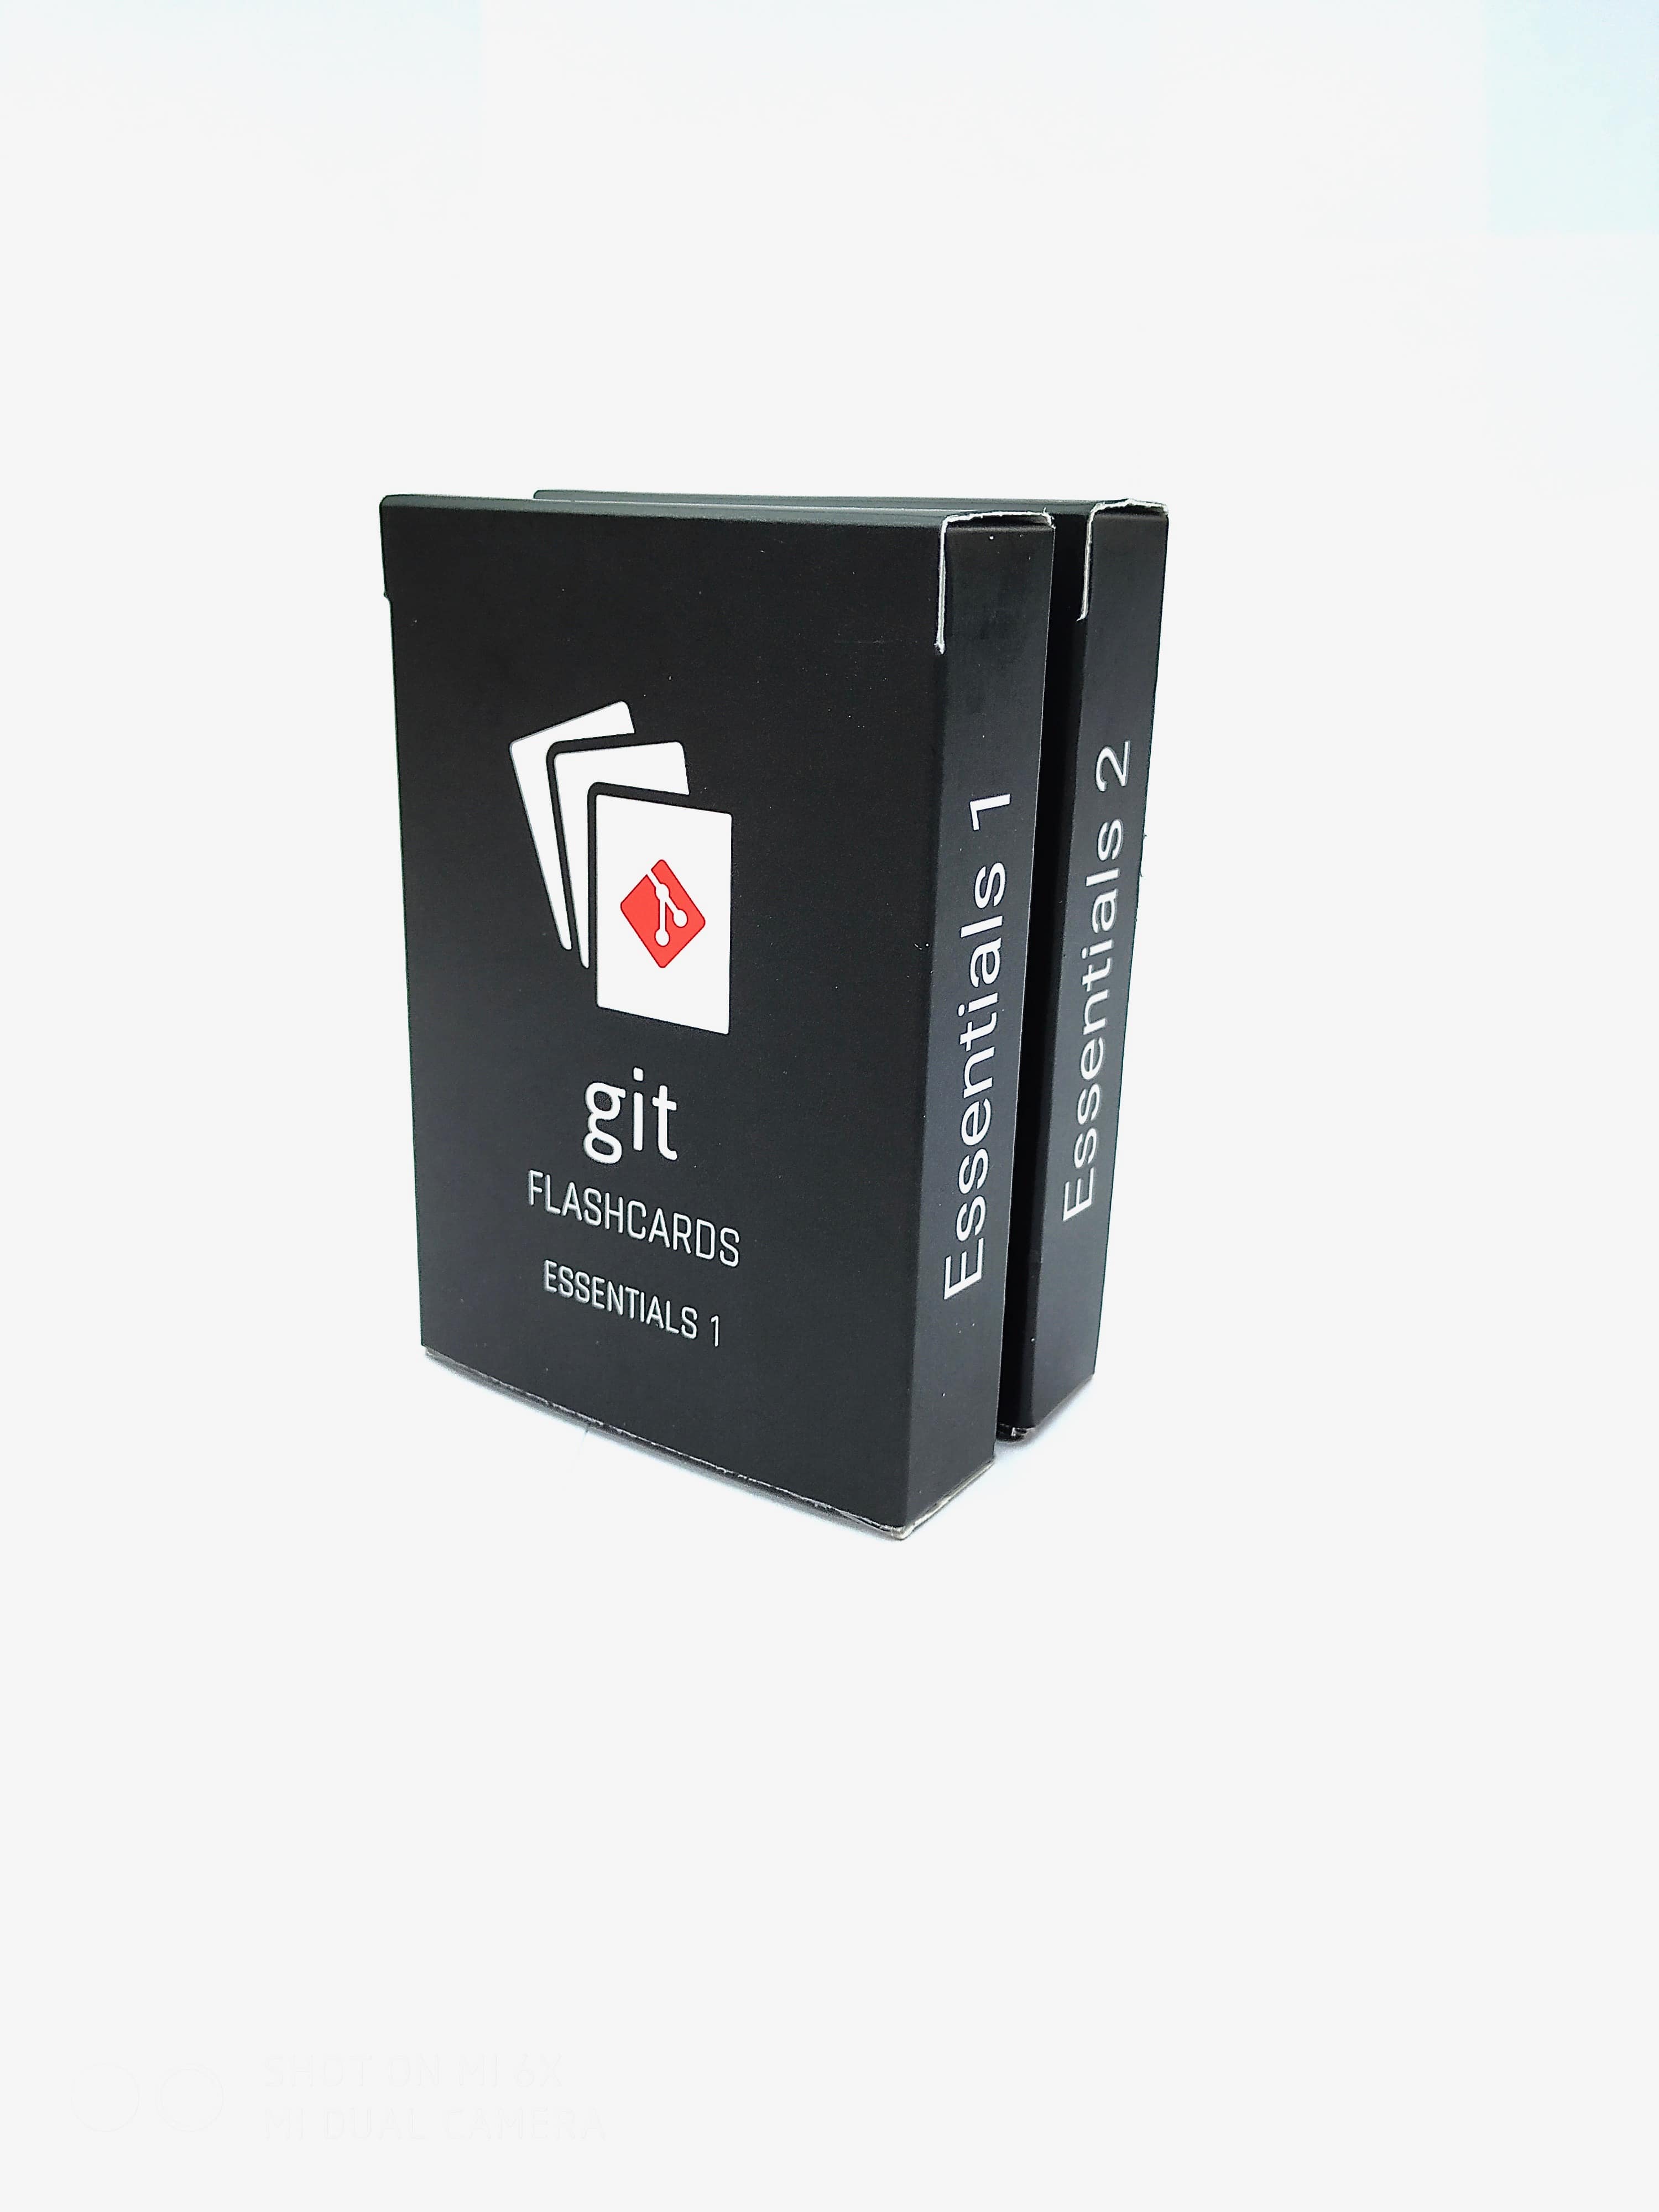 Range of Git card products